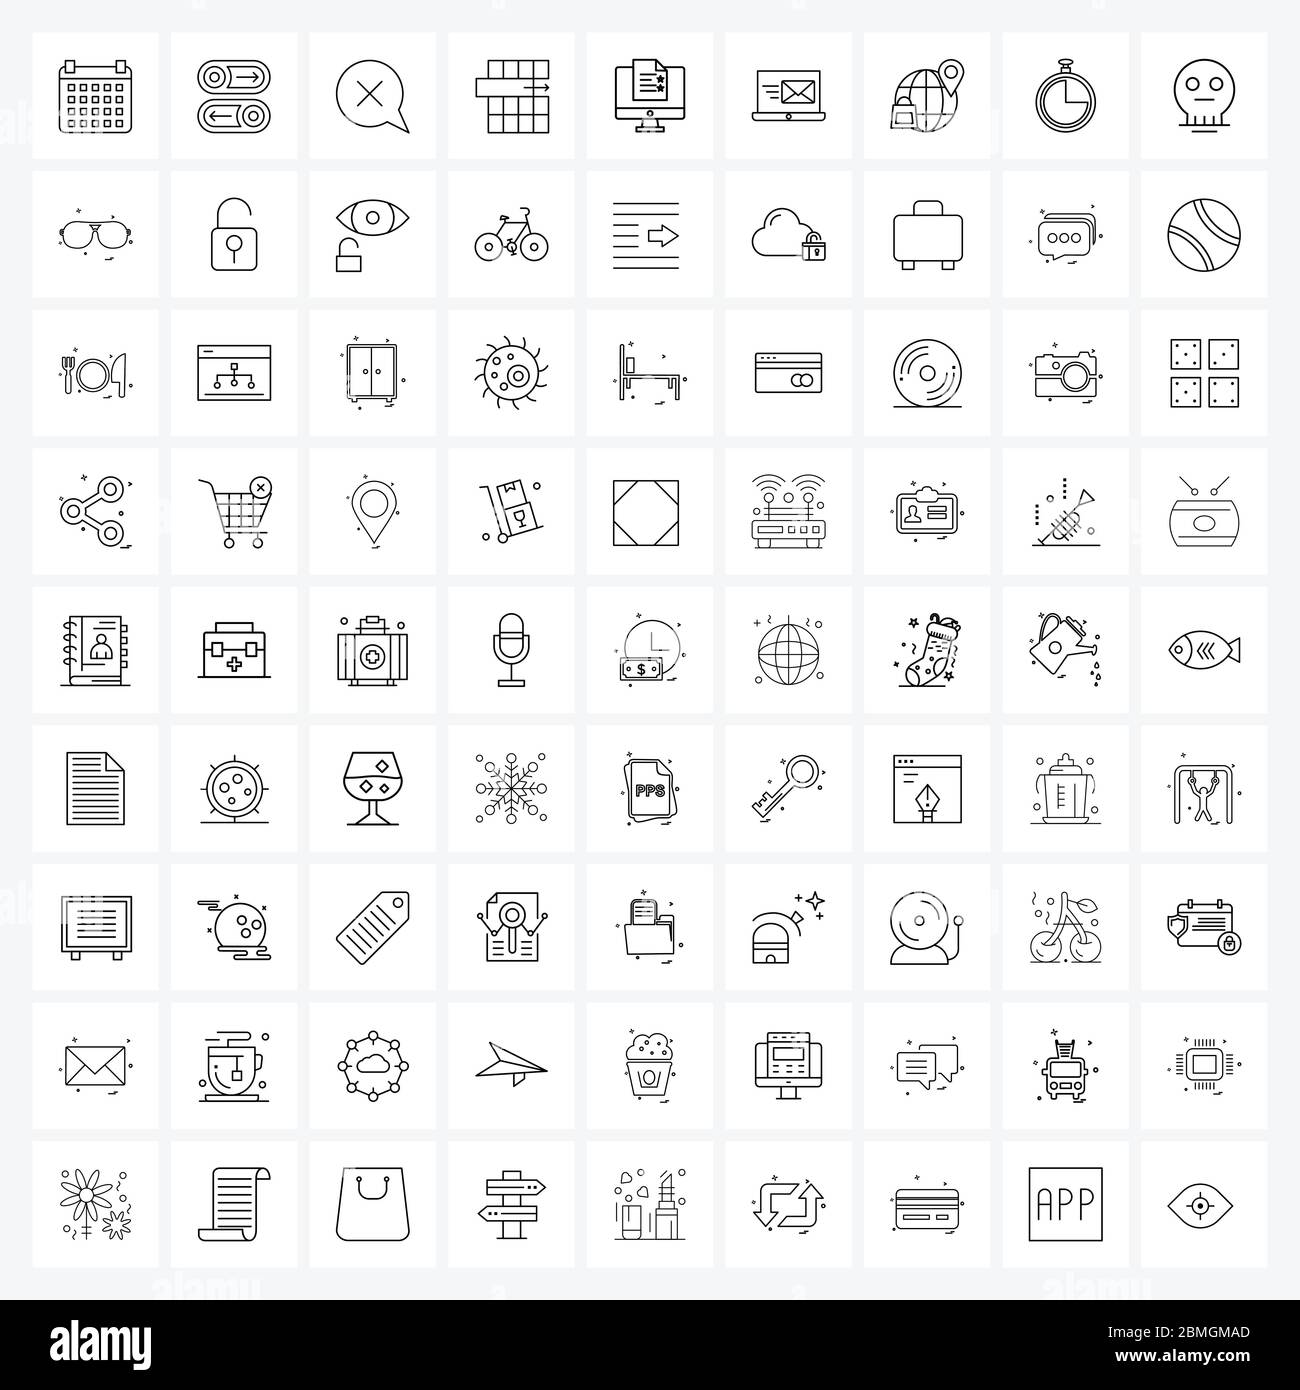 Stock Vector Icon Set of 81 Line Symbols for email, row, switch, extract, cross Vector Illustration Stock Vector